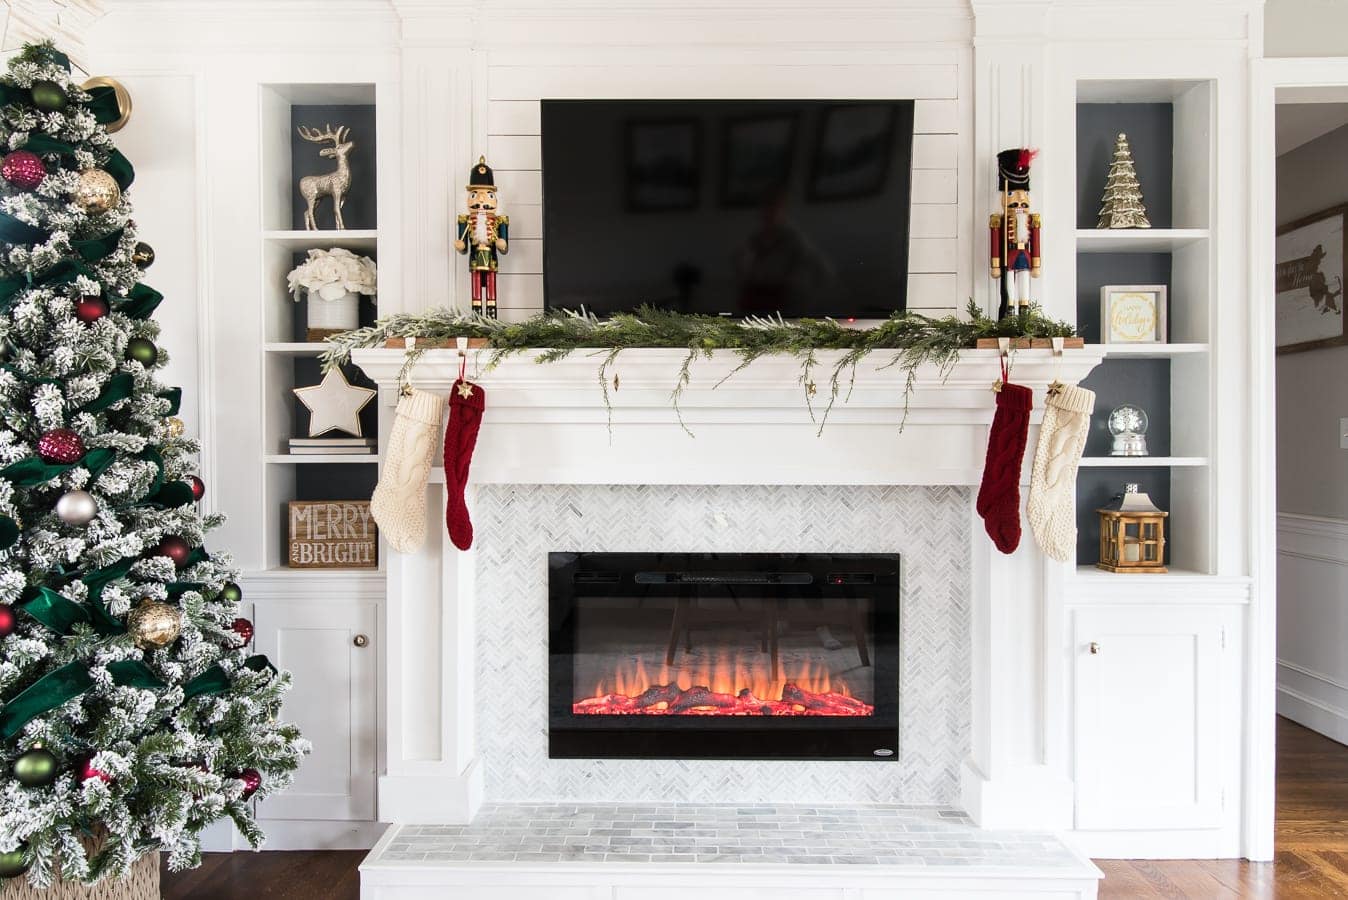 Christmas mantel decorating ideas with tv above it